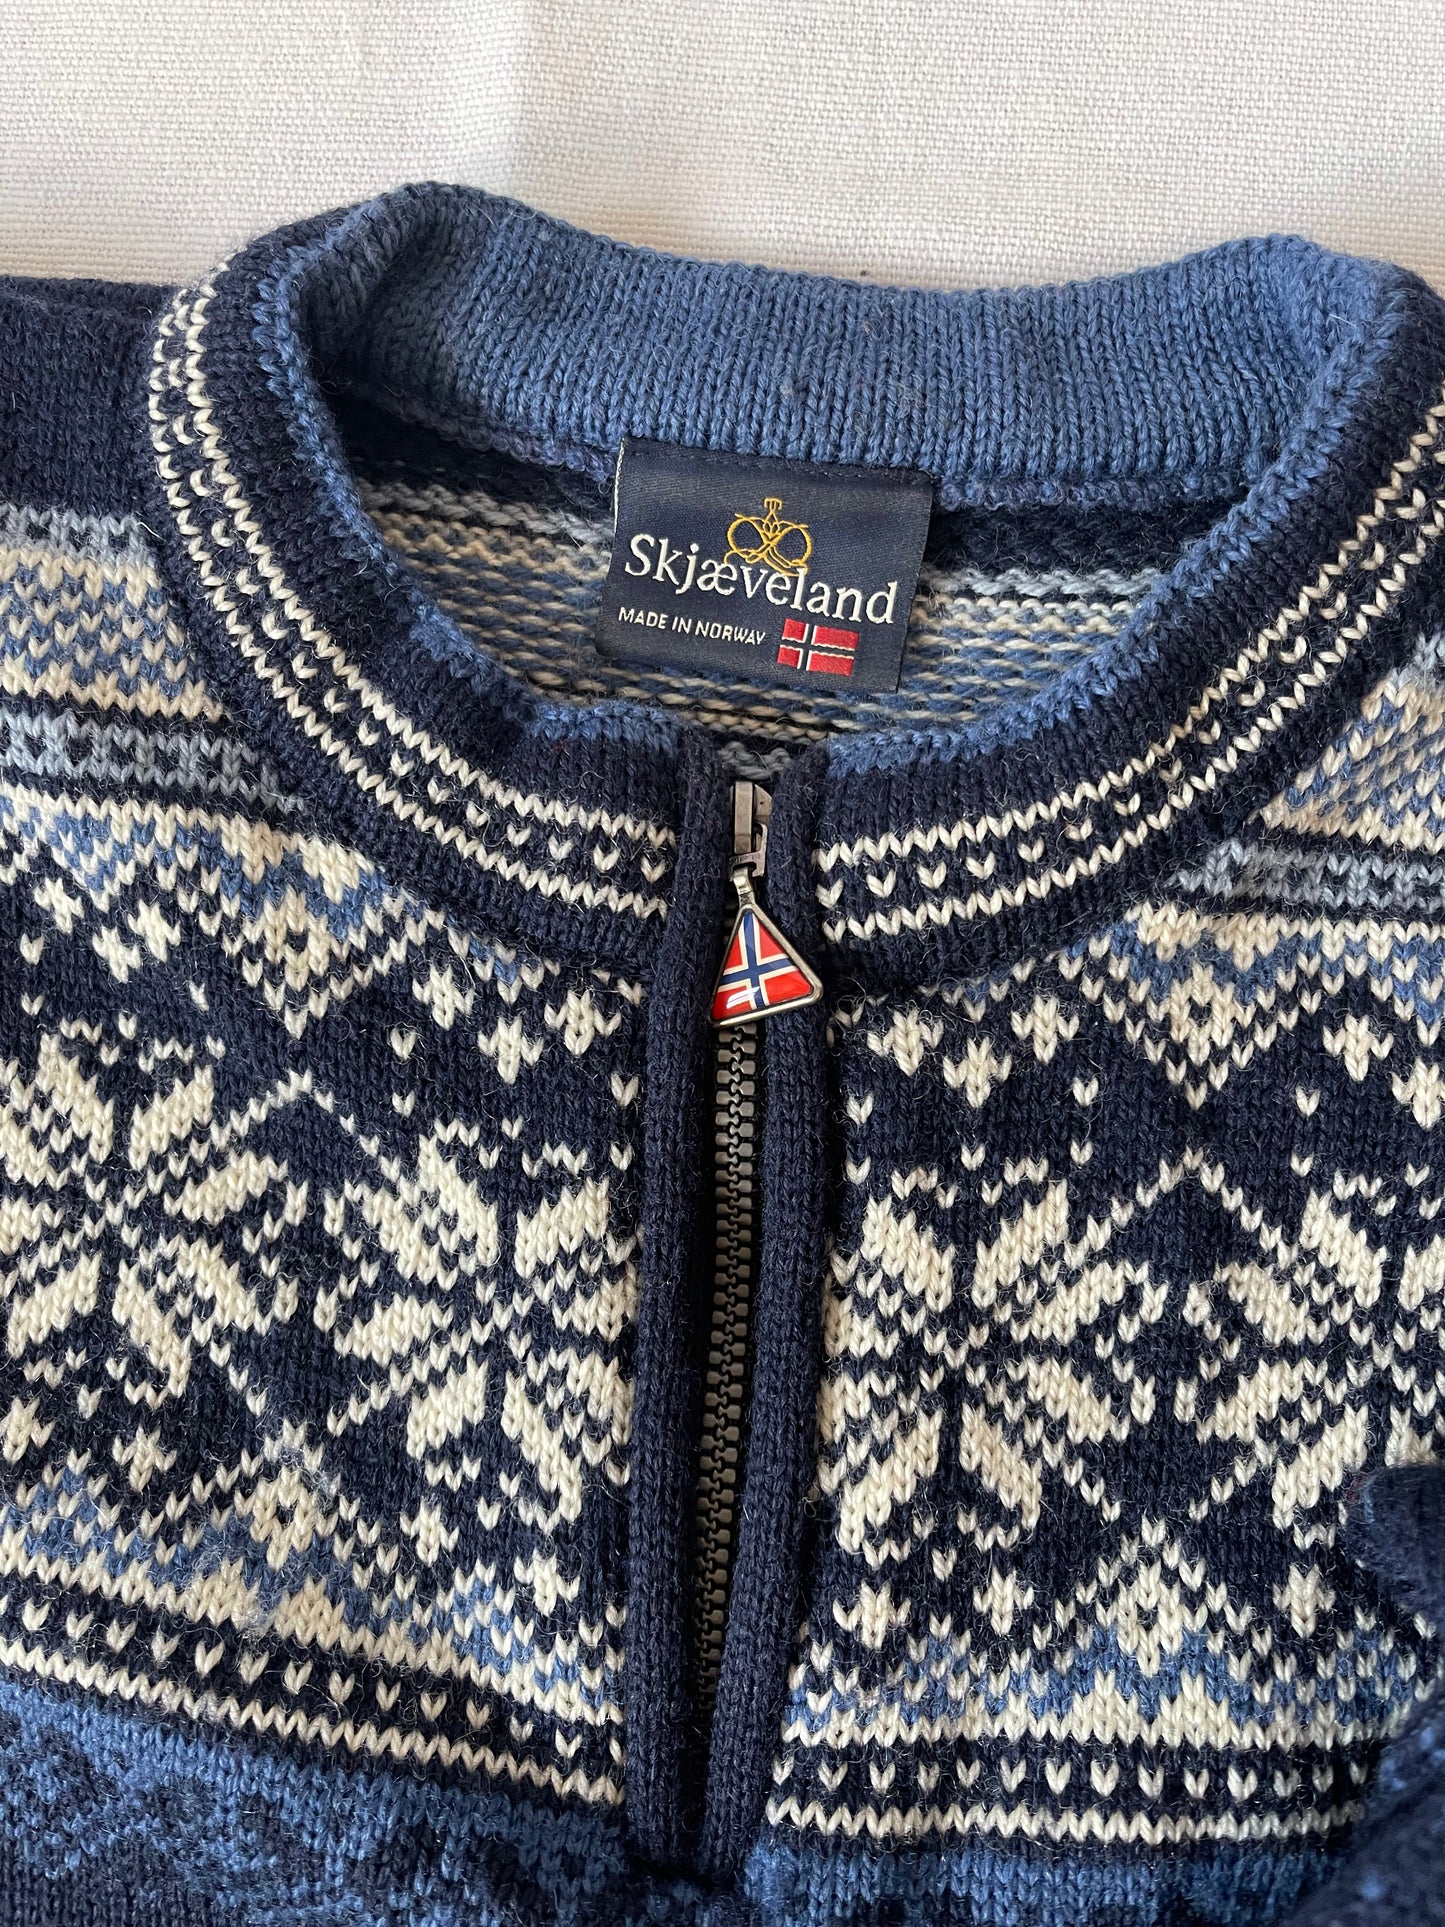 Skjæveland Jumper Made in Norway Pure New Wool Blue Snowflake Size S-M